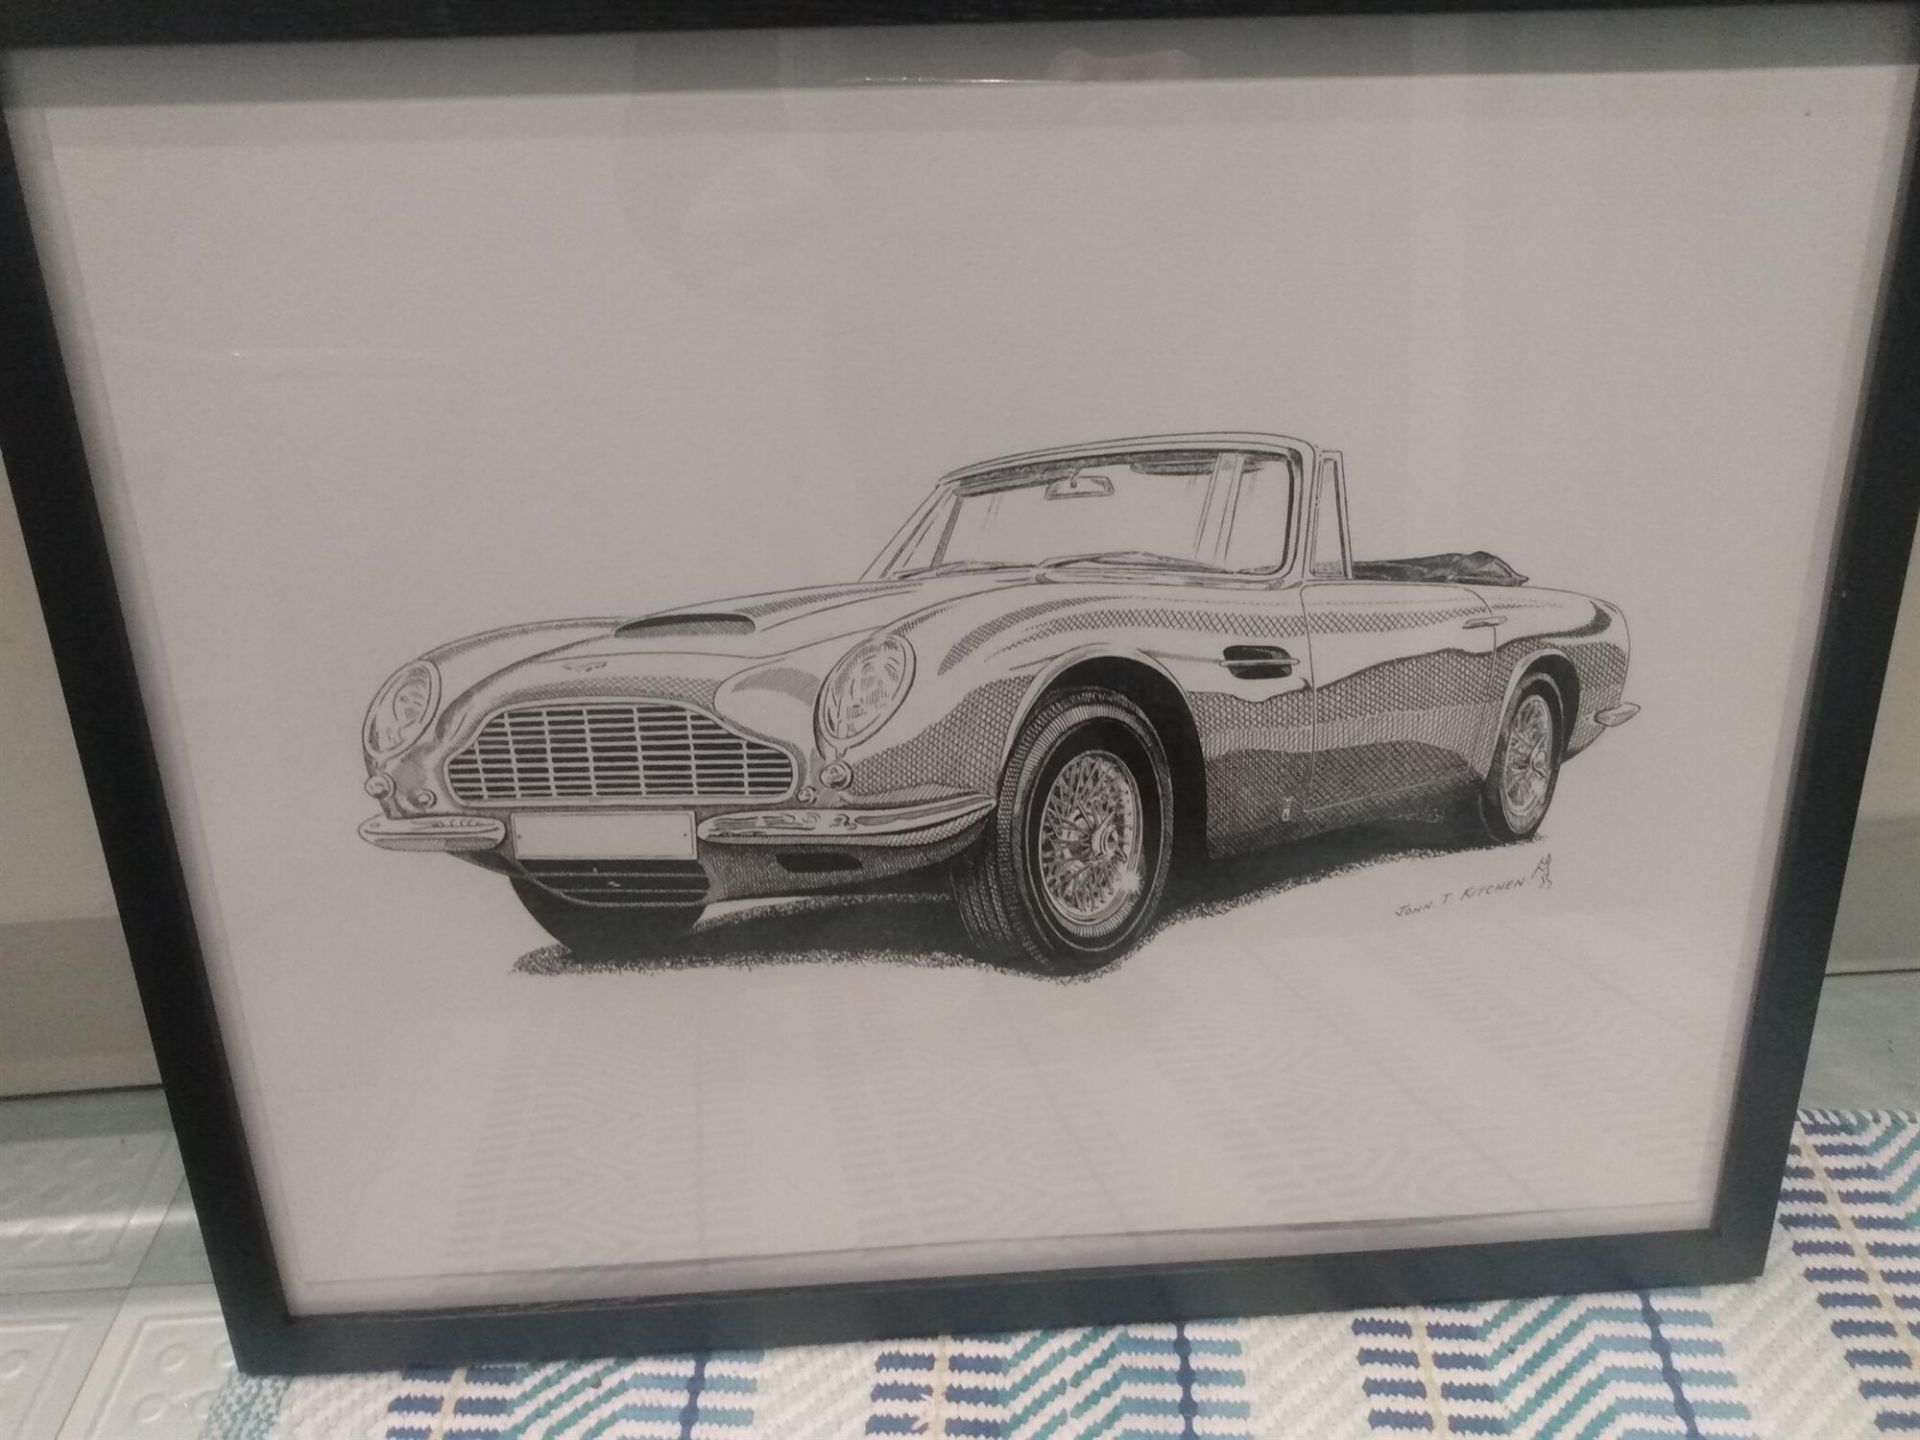 Framed Original Sketch of a DB6 Volante by John T. Kitchen - Image 2 of 3